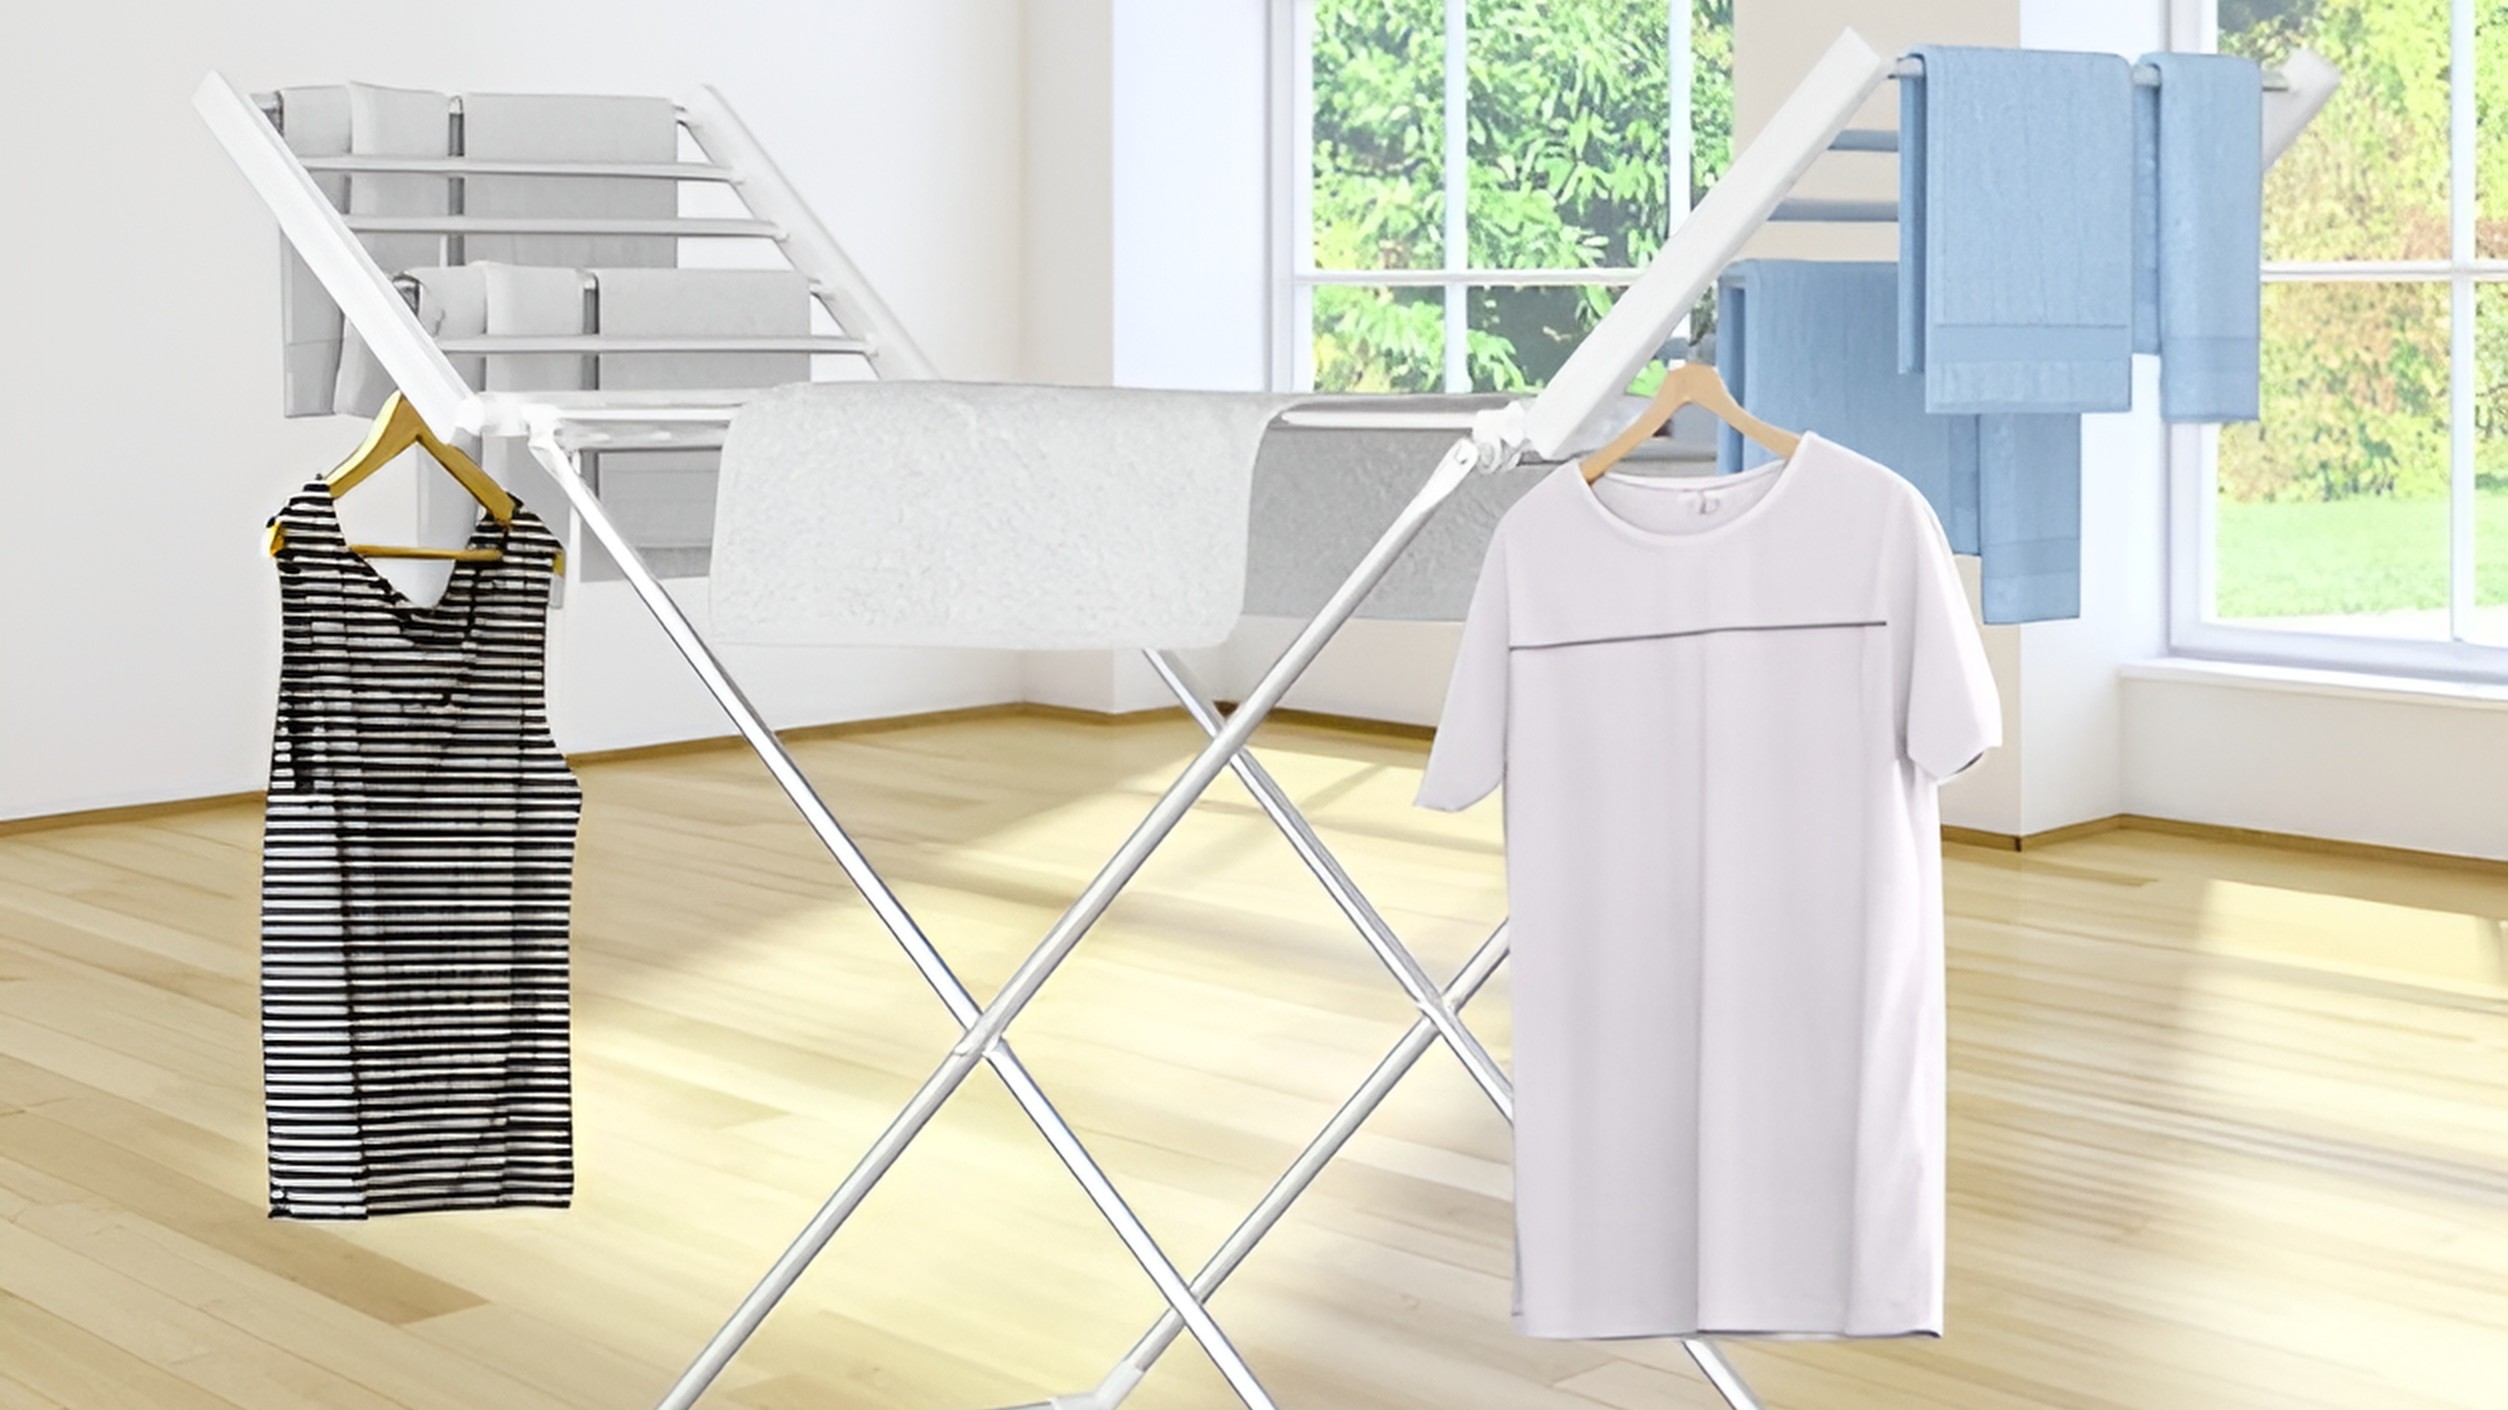 Heated Clothes Airer ADVWIN Electric Clothes Folding Free-Standing Drying Rack